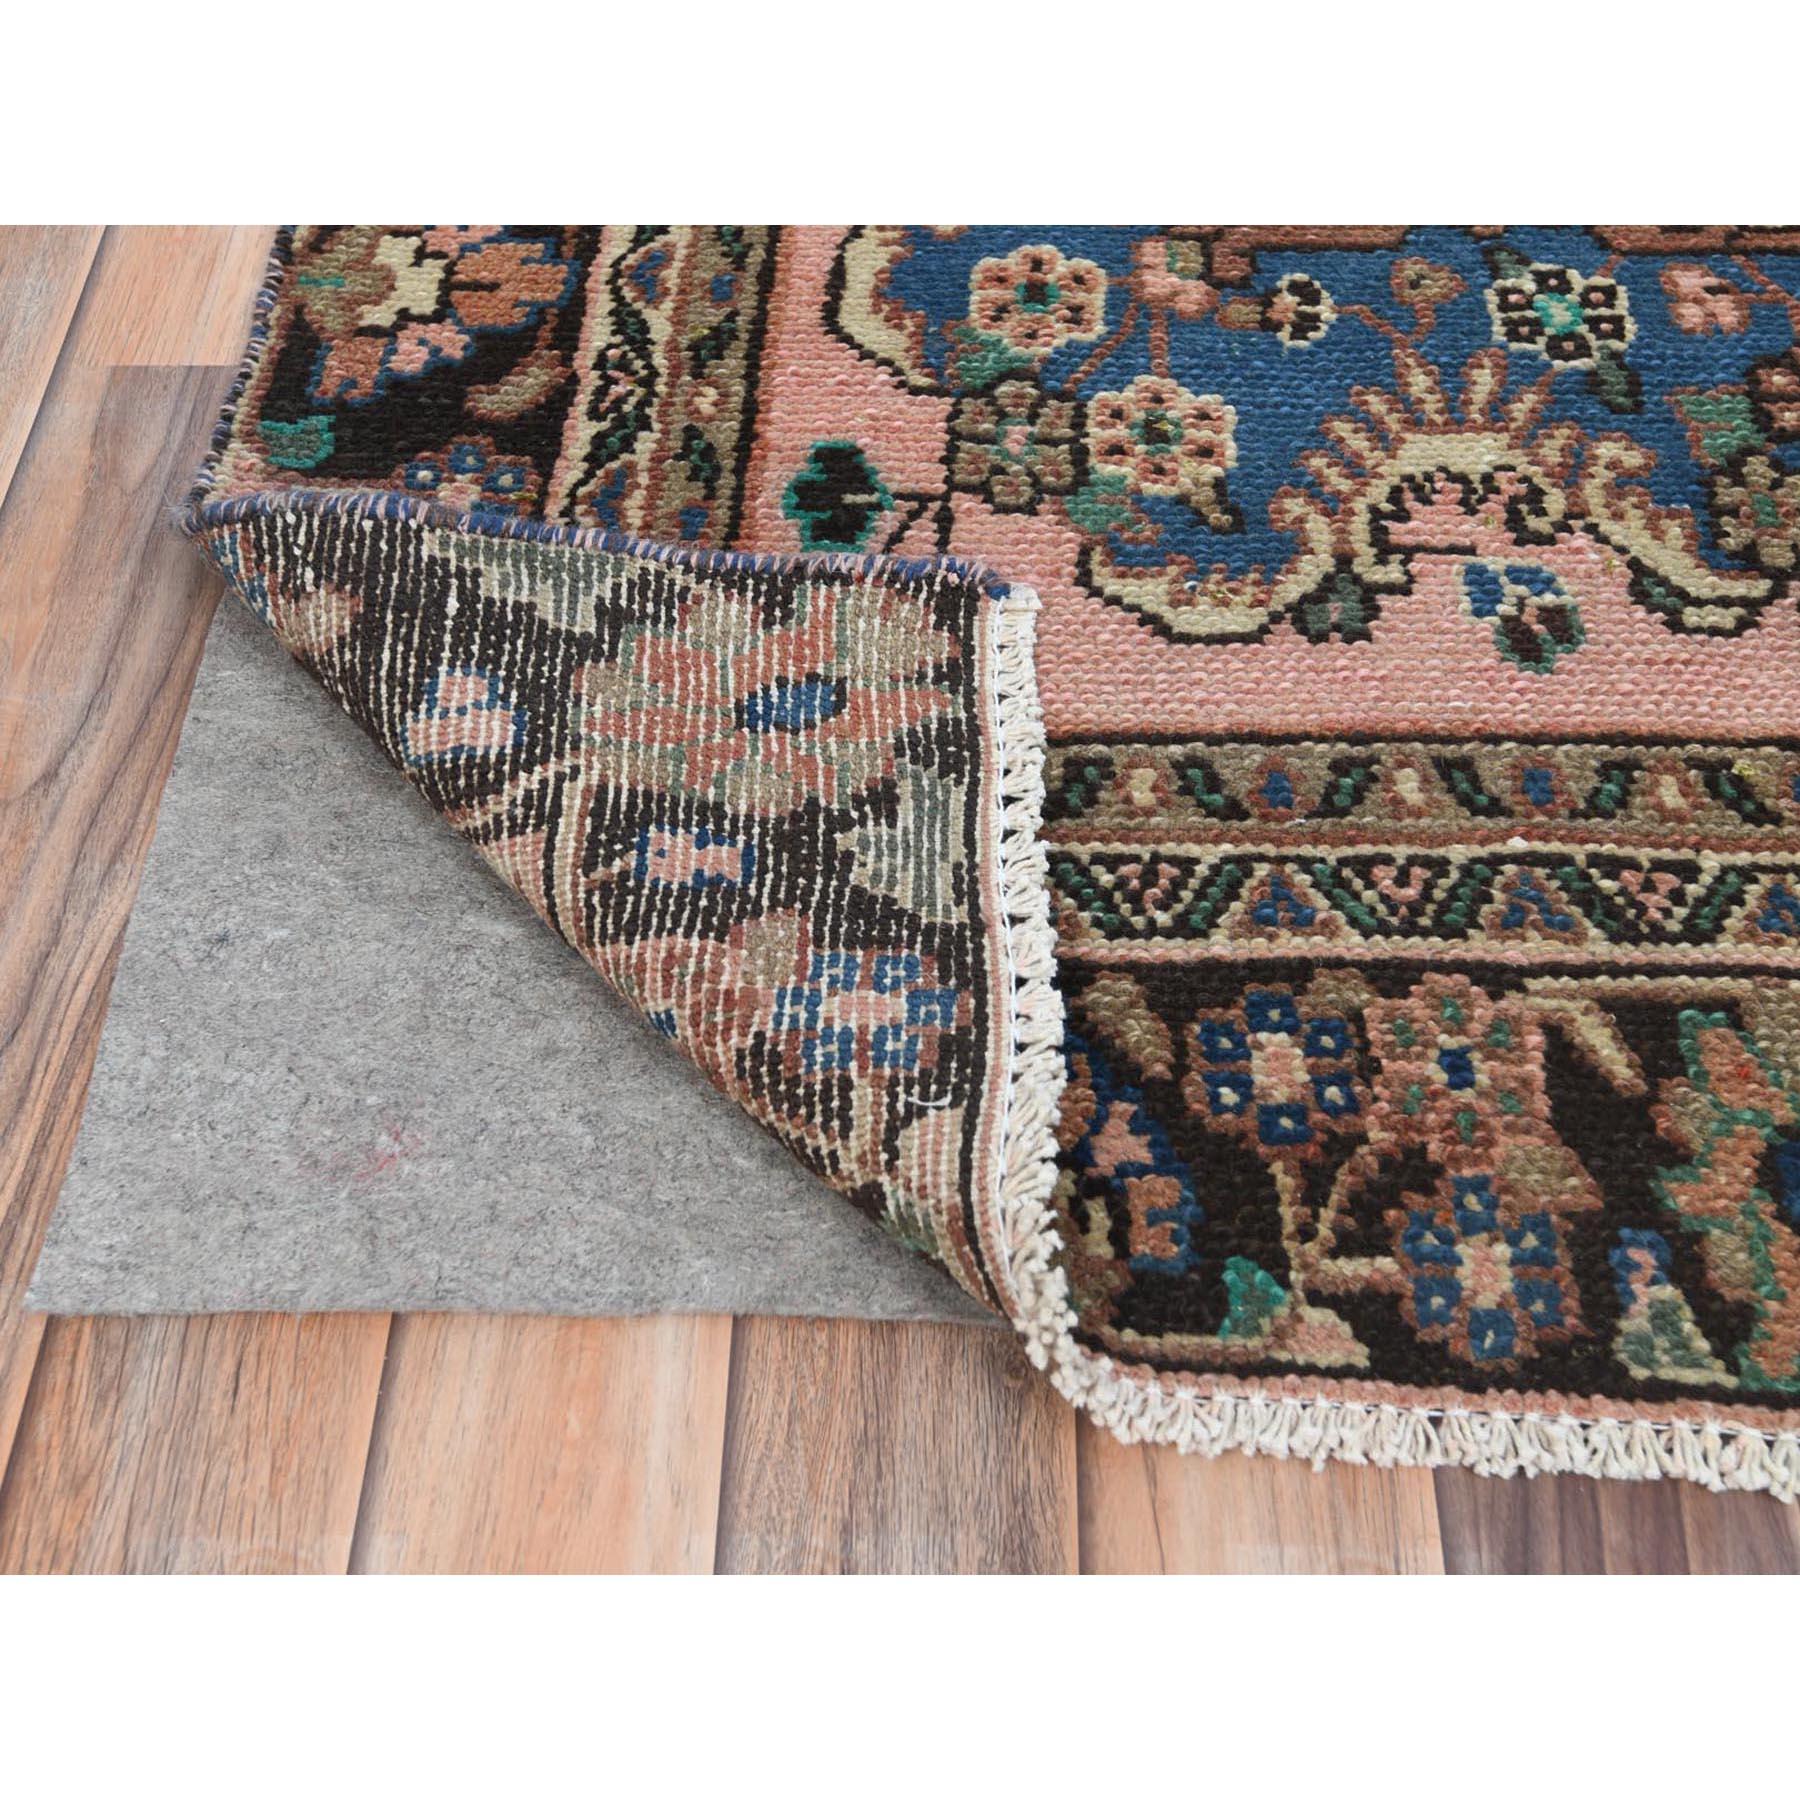 Peach Color, Distressed Worn Wool Hand Knotted, Vintage Persian Bibikabad Rug In Good Condition For Sale In Carlstadt, NJ